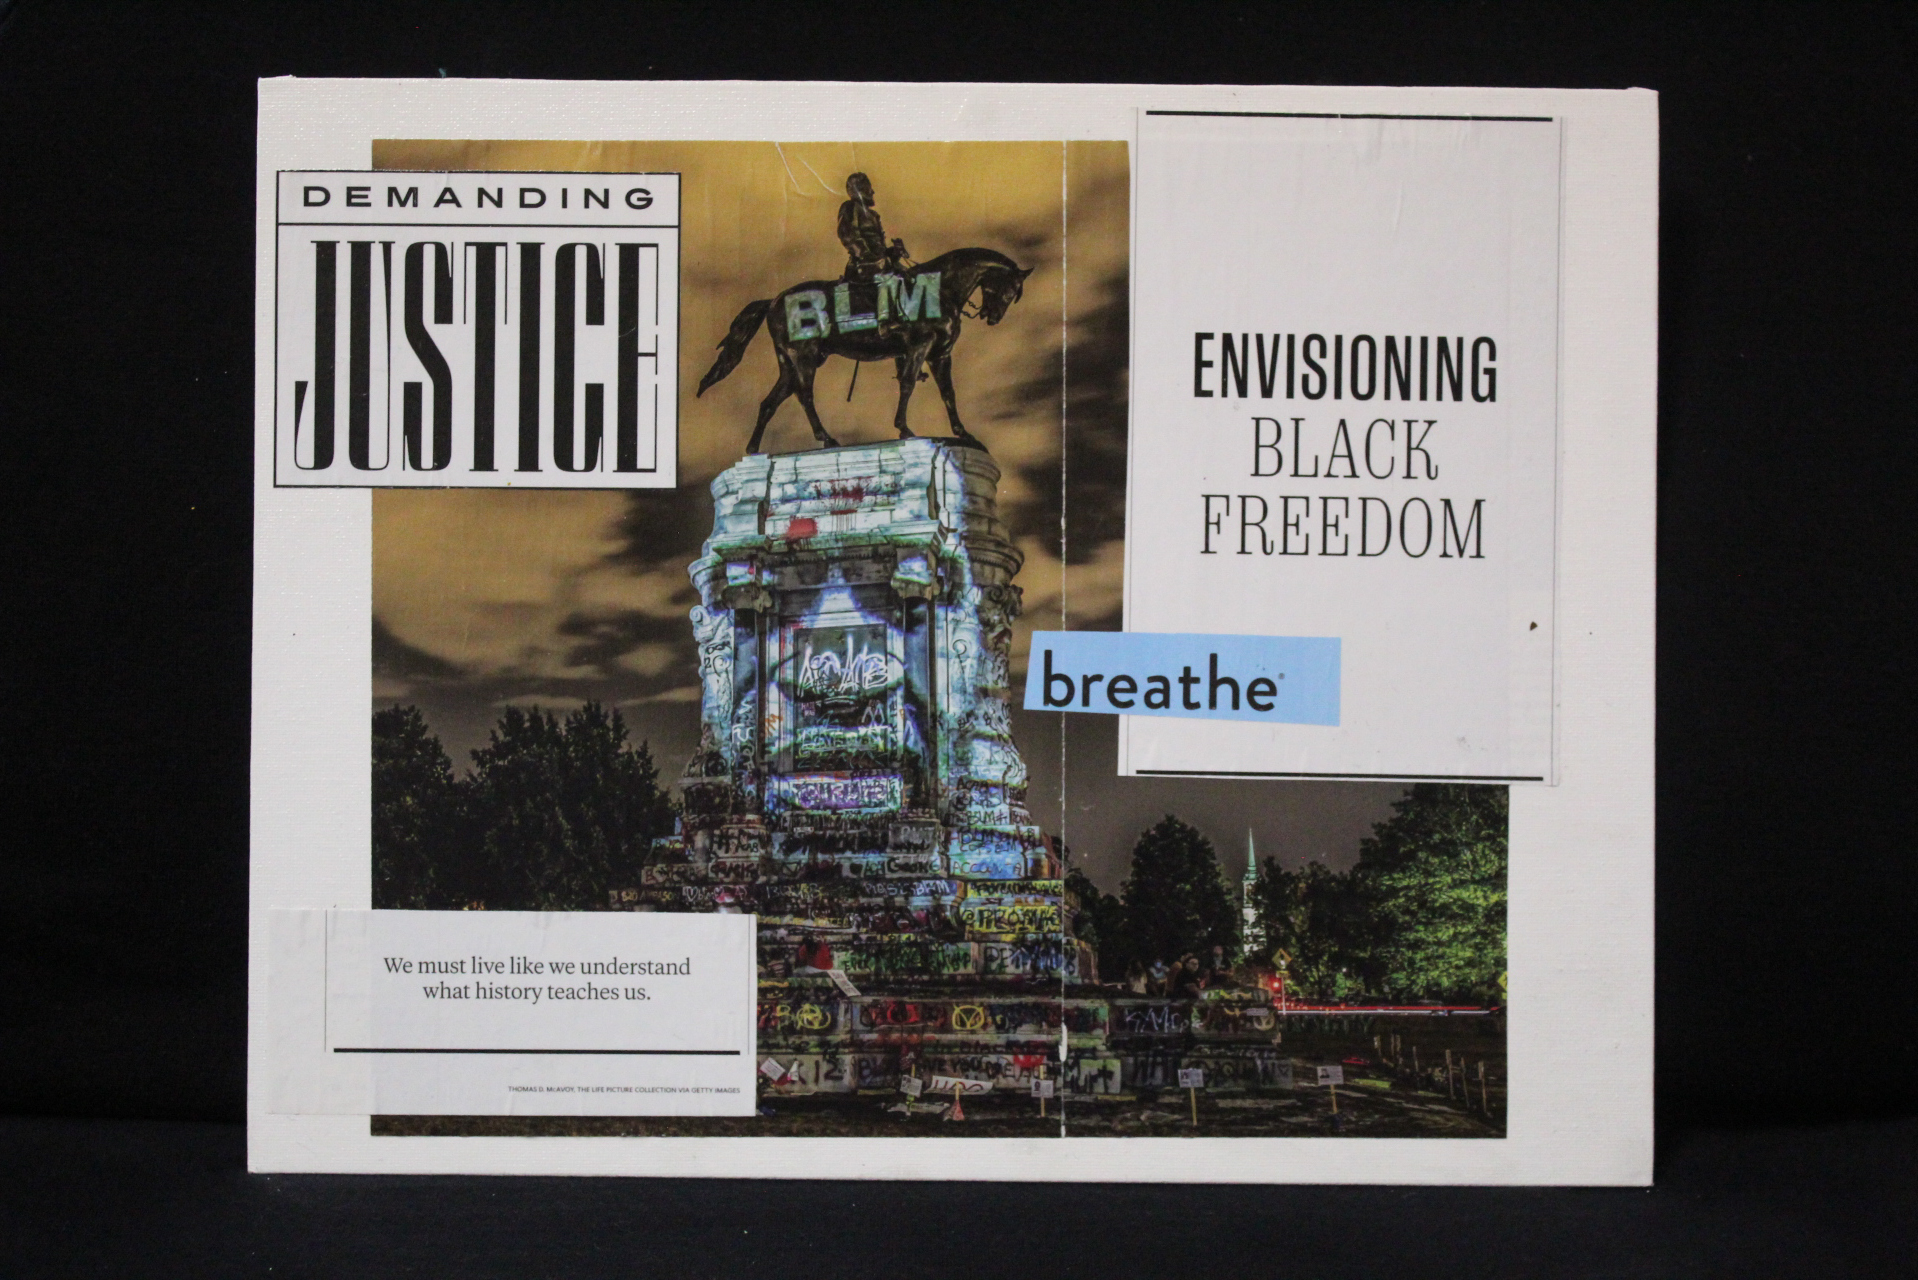 Gloria Bontrager-Thomas's collage entitled "Hope:" the collage includes clippings reading "Demanding Justice," "Envisioning Black Freedom," "Breathe," and "We must live like we understand what history teaches us."